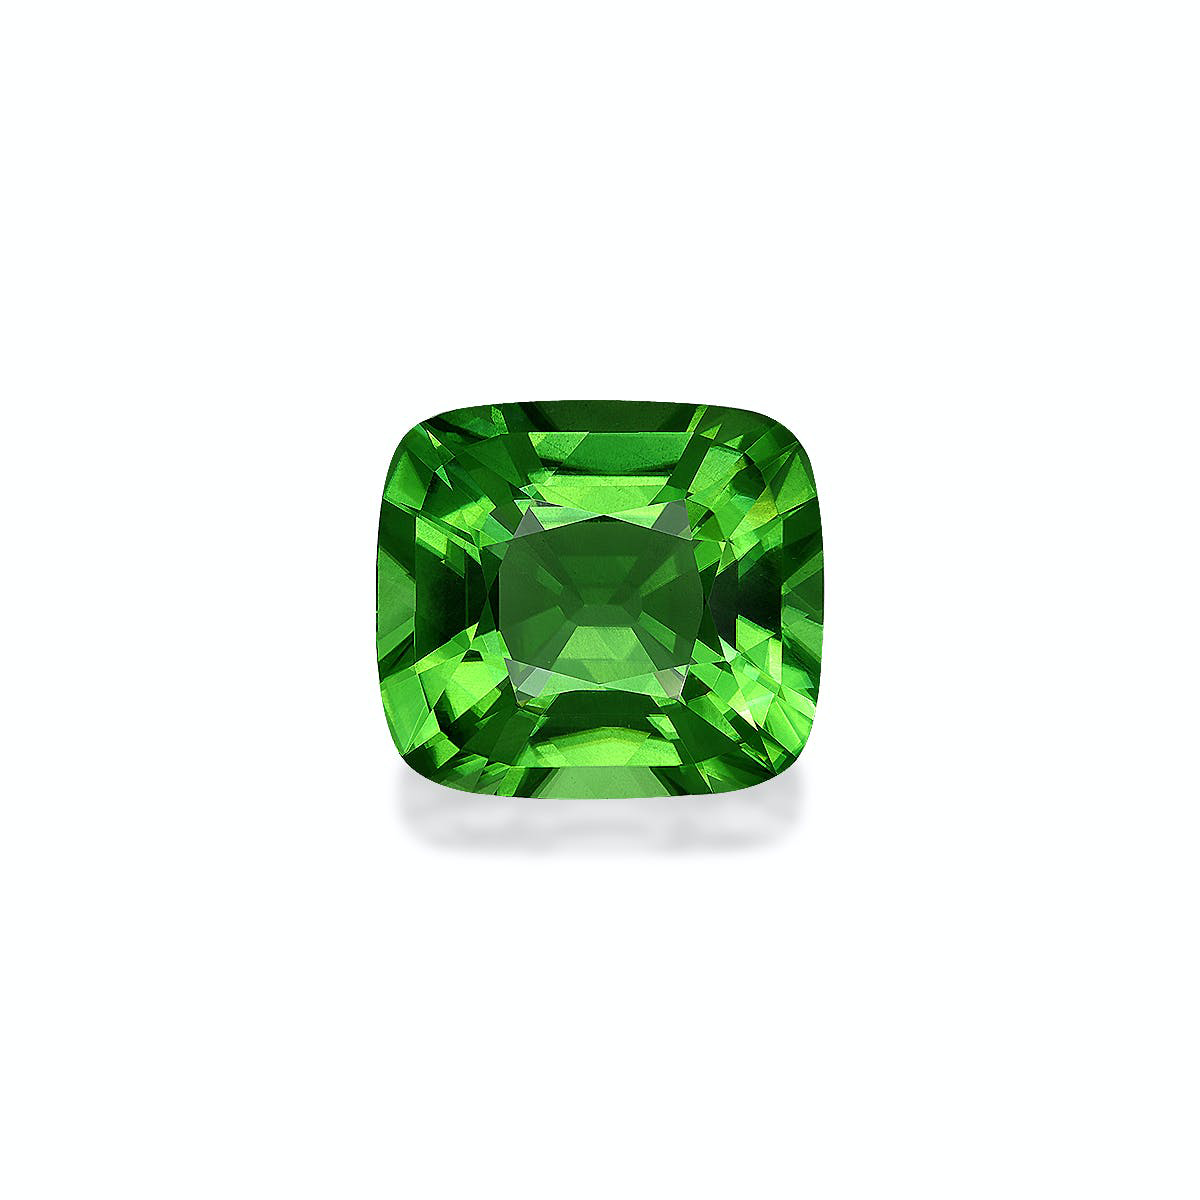 Picture of Vivid Green Peridot 36.94ct - 21x19mm (PD0301)